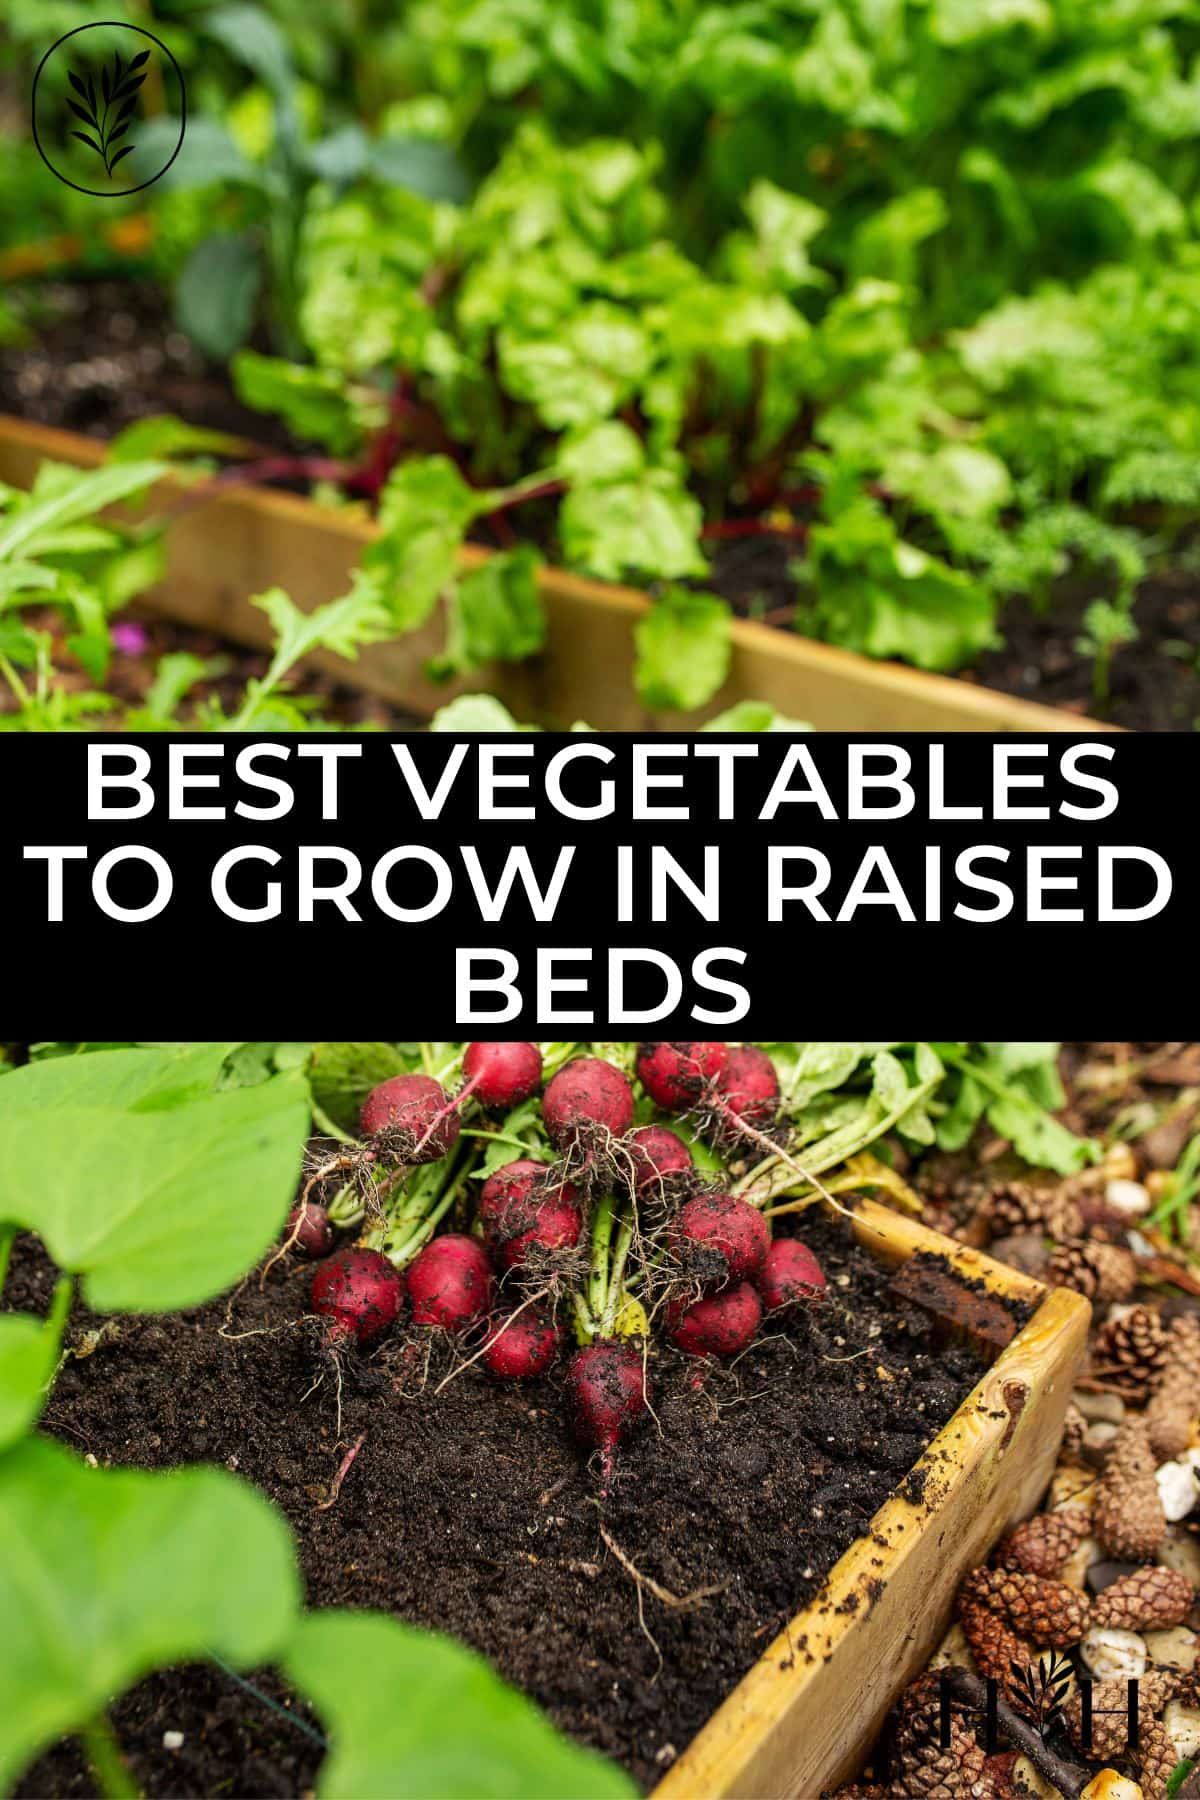 Best vegetables to grow in raised beds via @home4theharvest